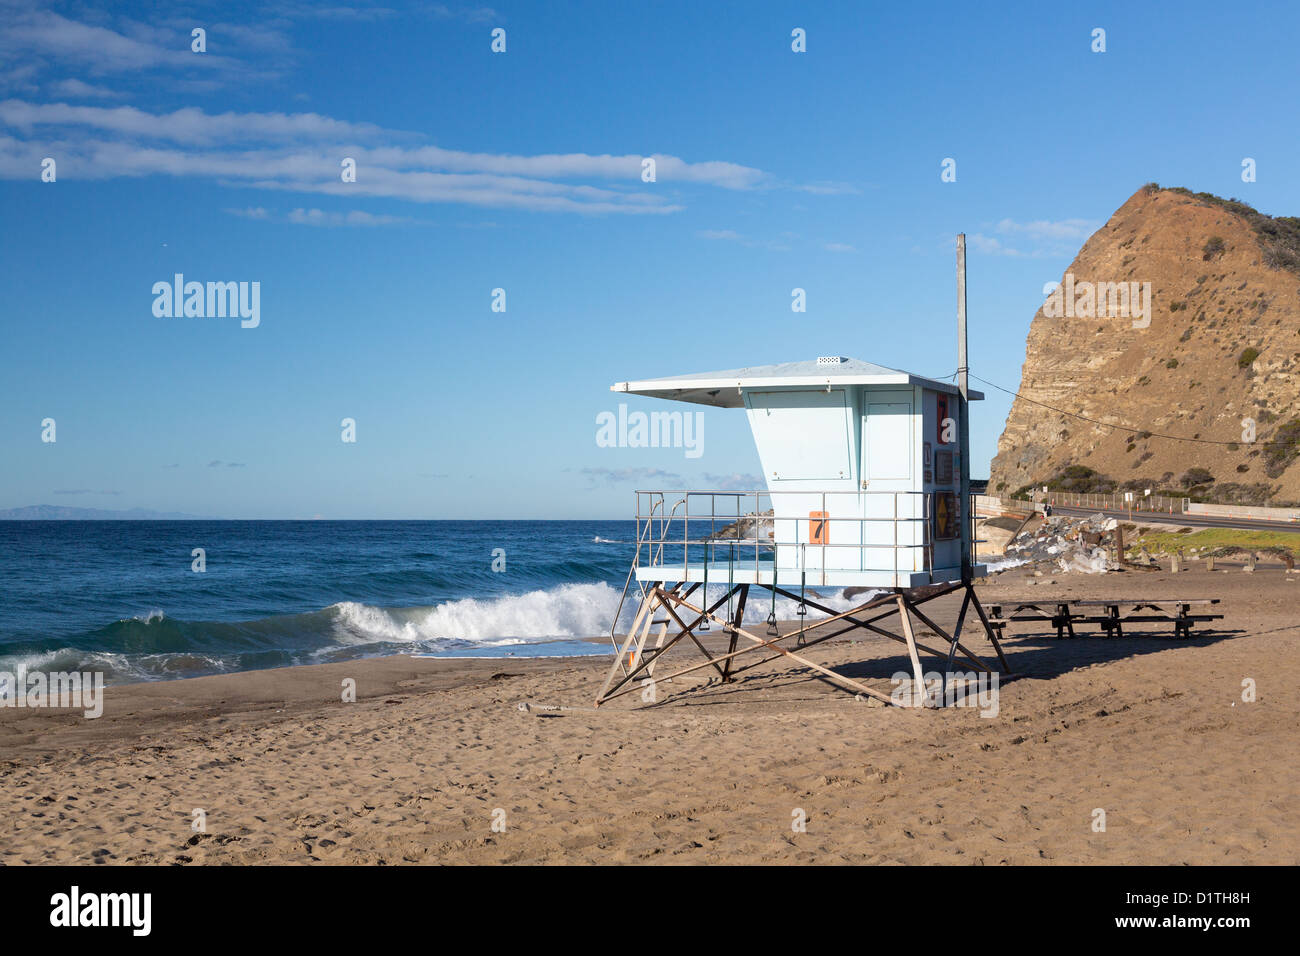 Blue lifeguard hut on Sycamore Canyon beach in Southern California Stock Photo